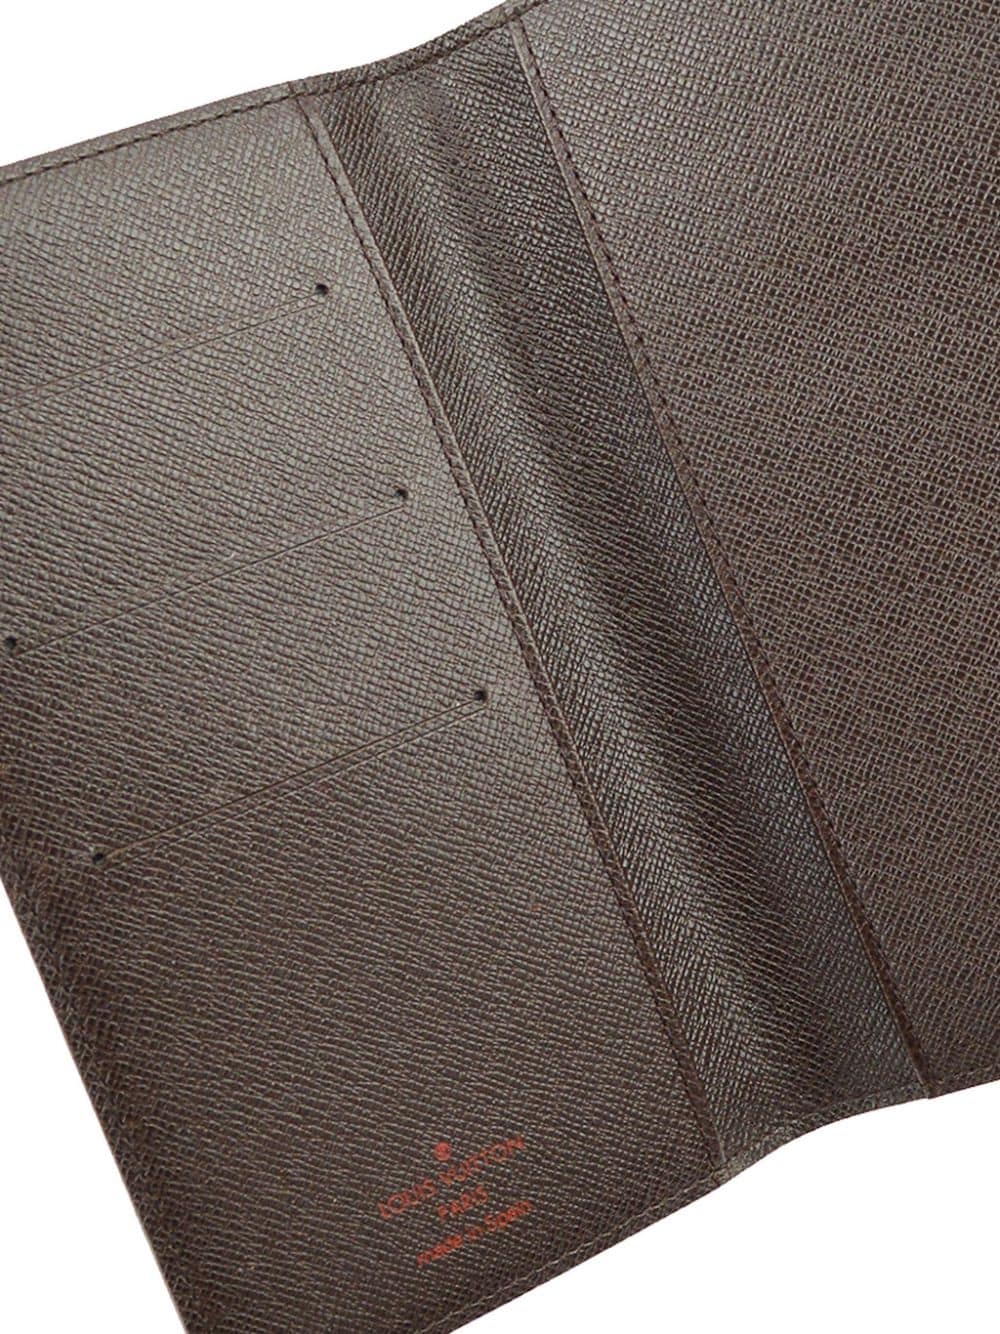 Pre-owned Louis Vuitton 2001 Agenda Book Cover In Brown